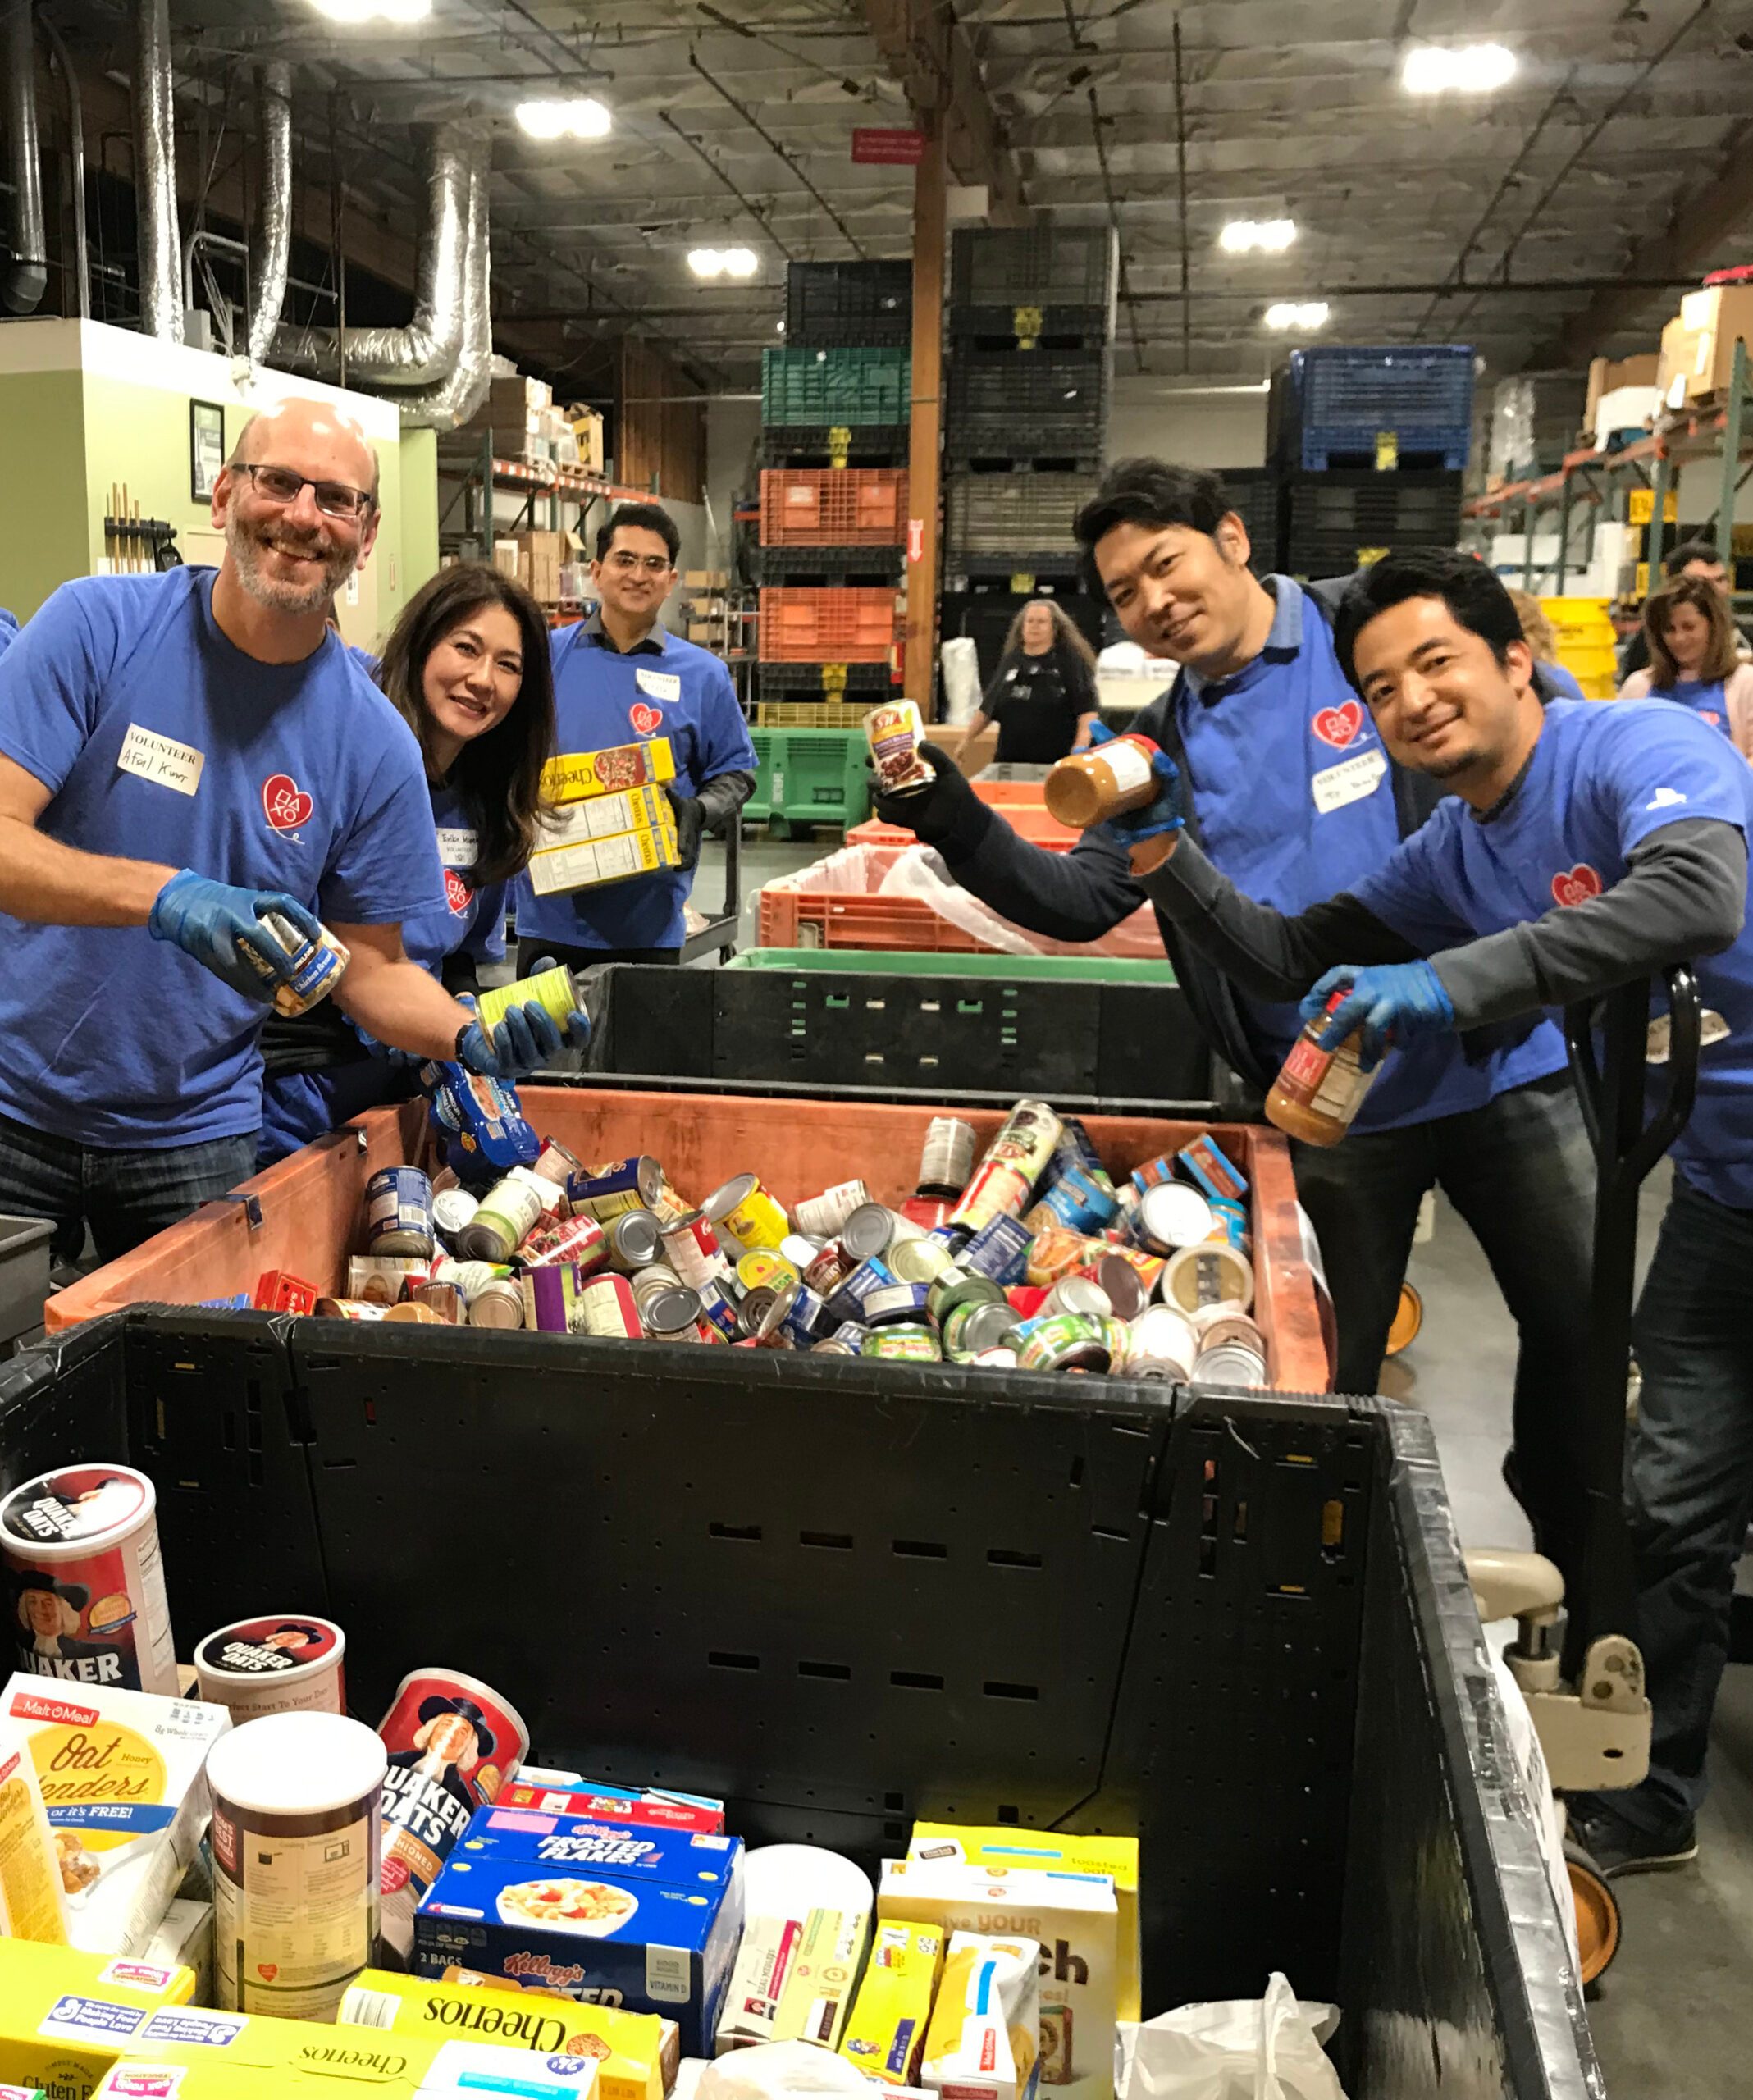 PlayStation Cares Team shown filling boxes for a food drive in a large warehouse.